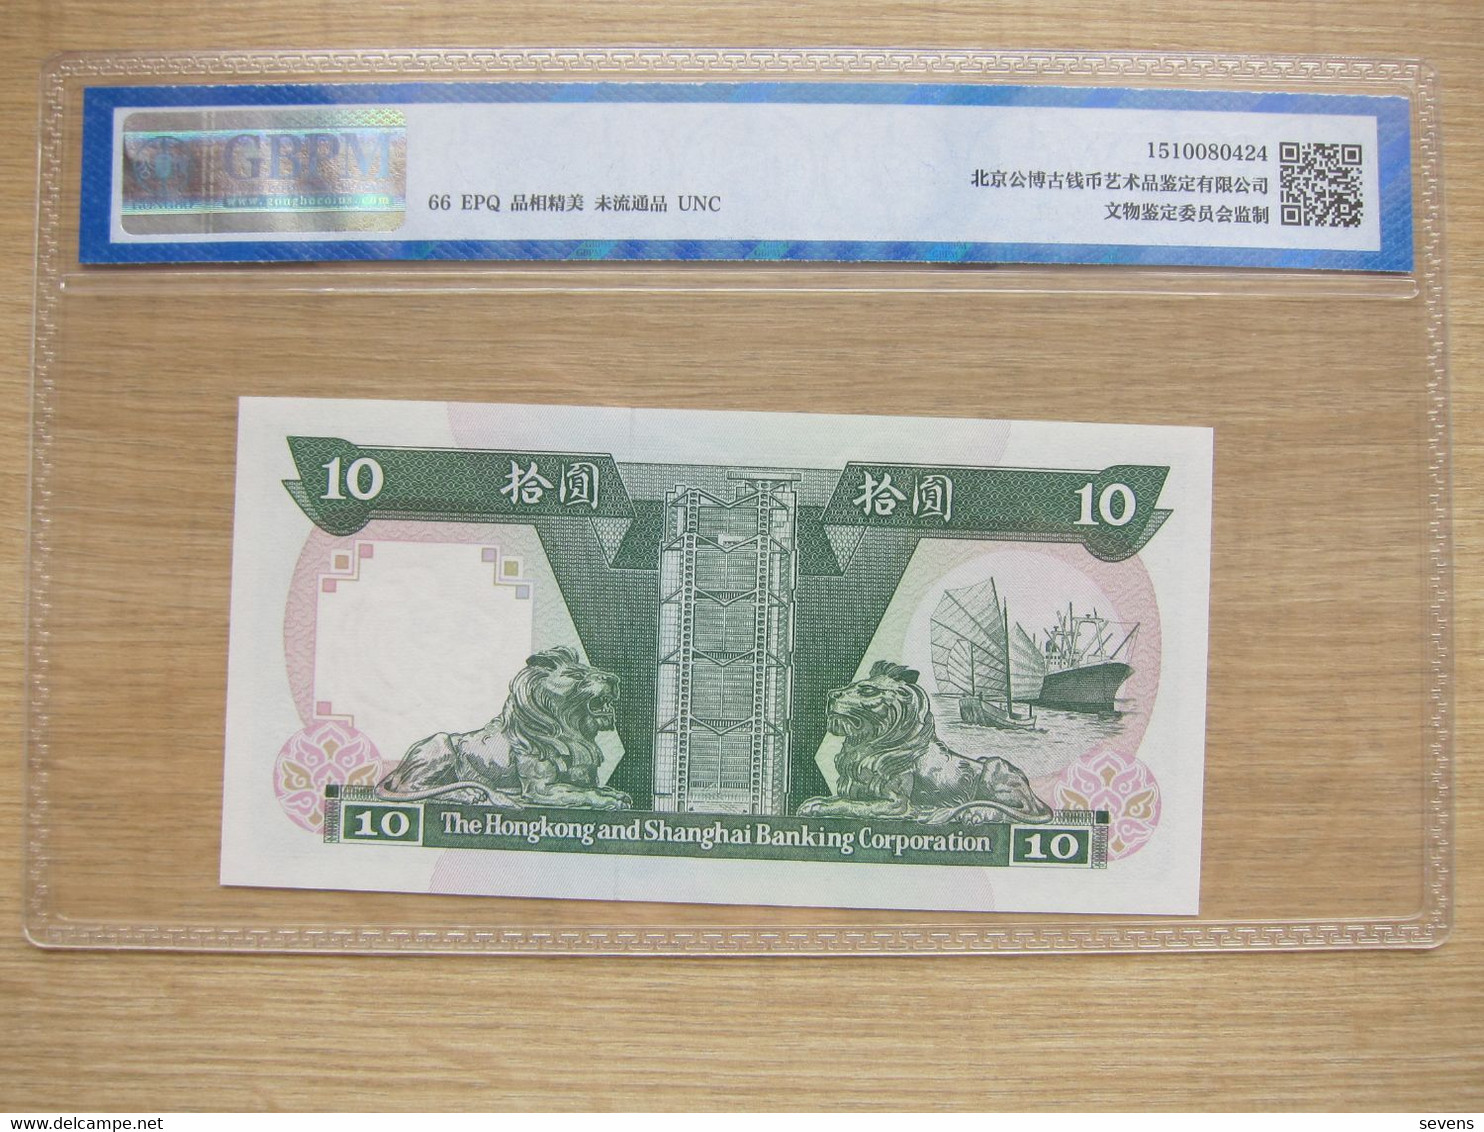 Hong Kong H&S Banking Corp. 1992 Ten Dollar Banknote, Gongbo Paper Money Guaranty UNC EPQ66, Packed - Other - Asia